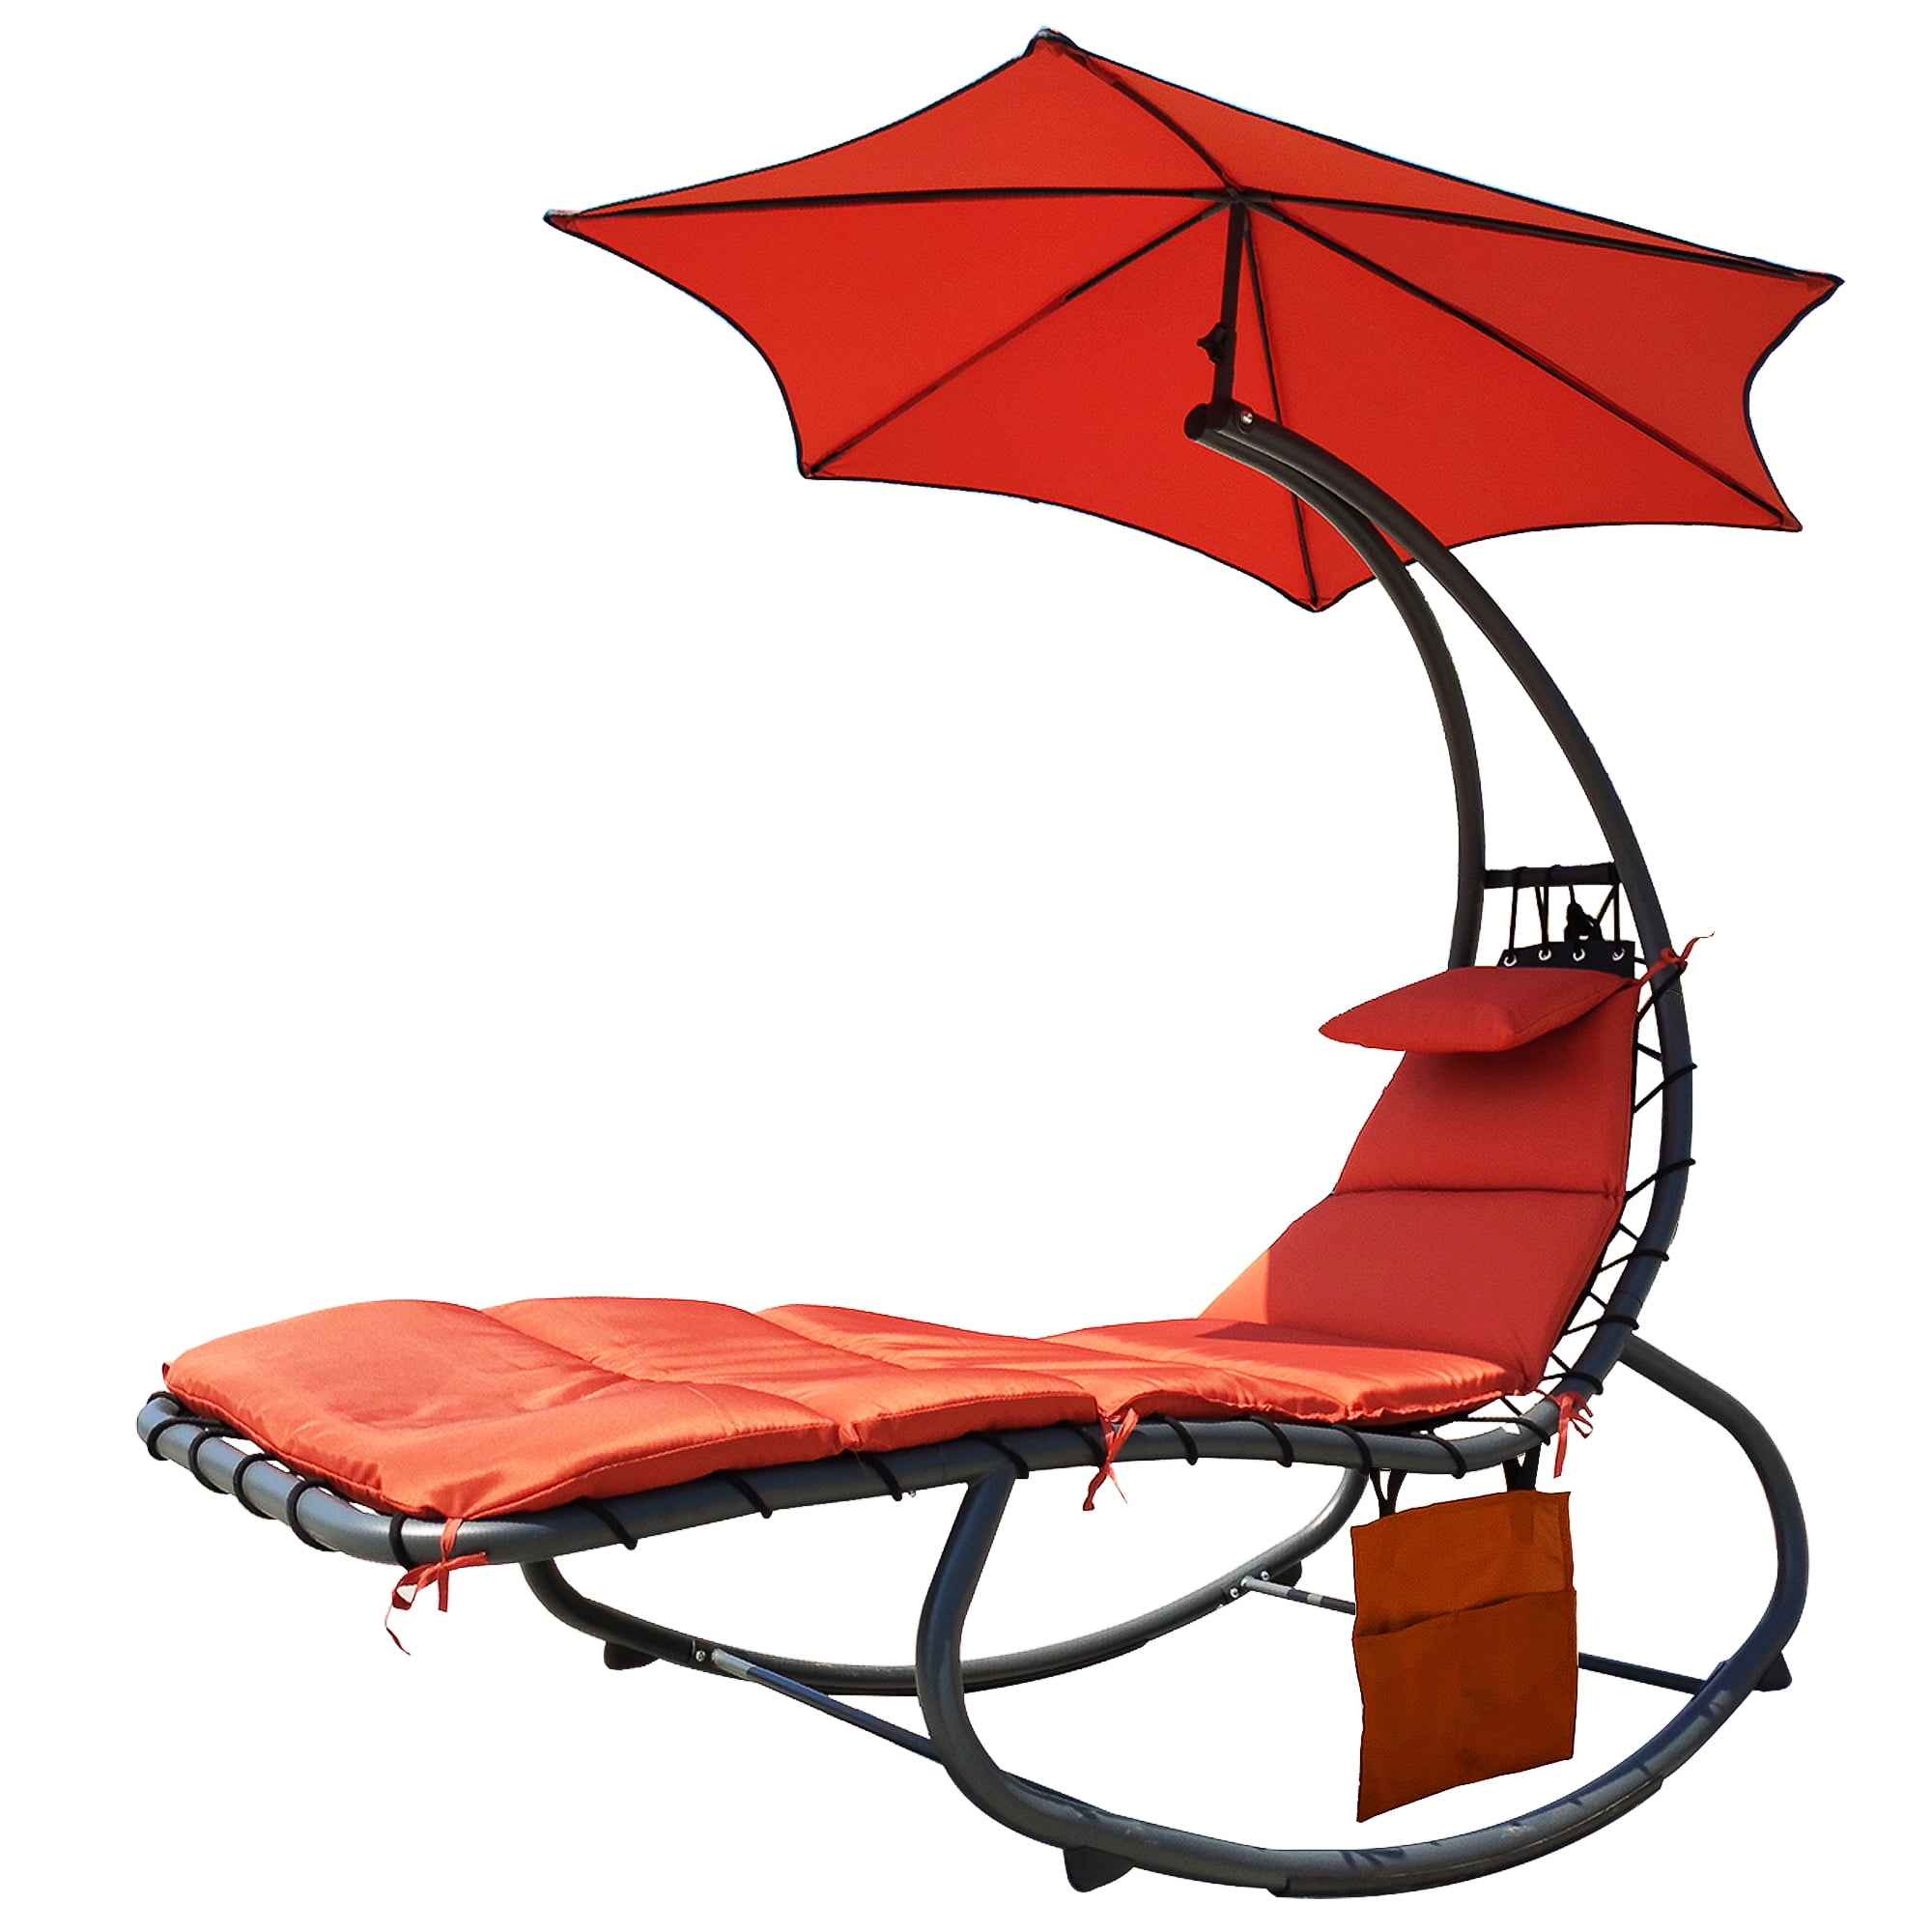 Details about   Patio Hanging Chaise Lounge Chair Swing Hammock Canopy Outdoor Beige 